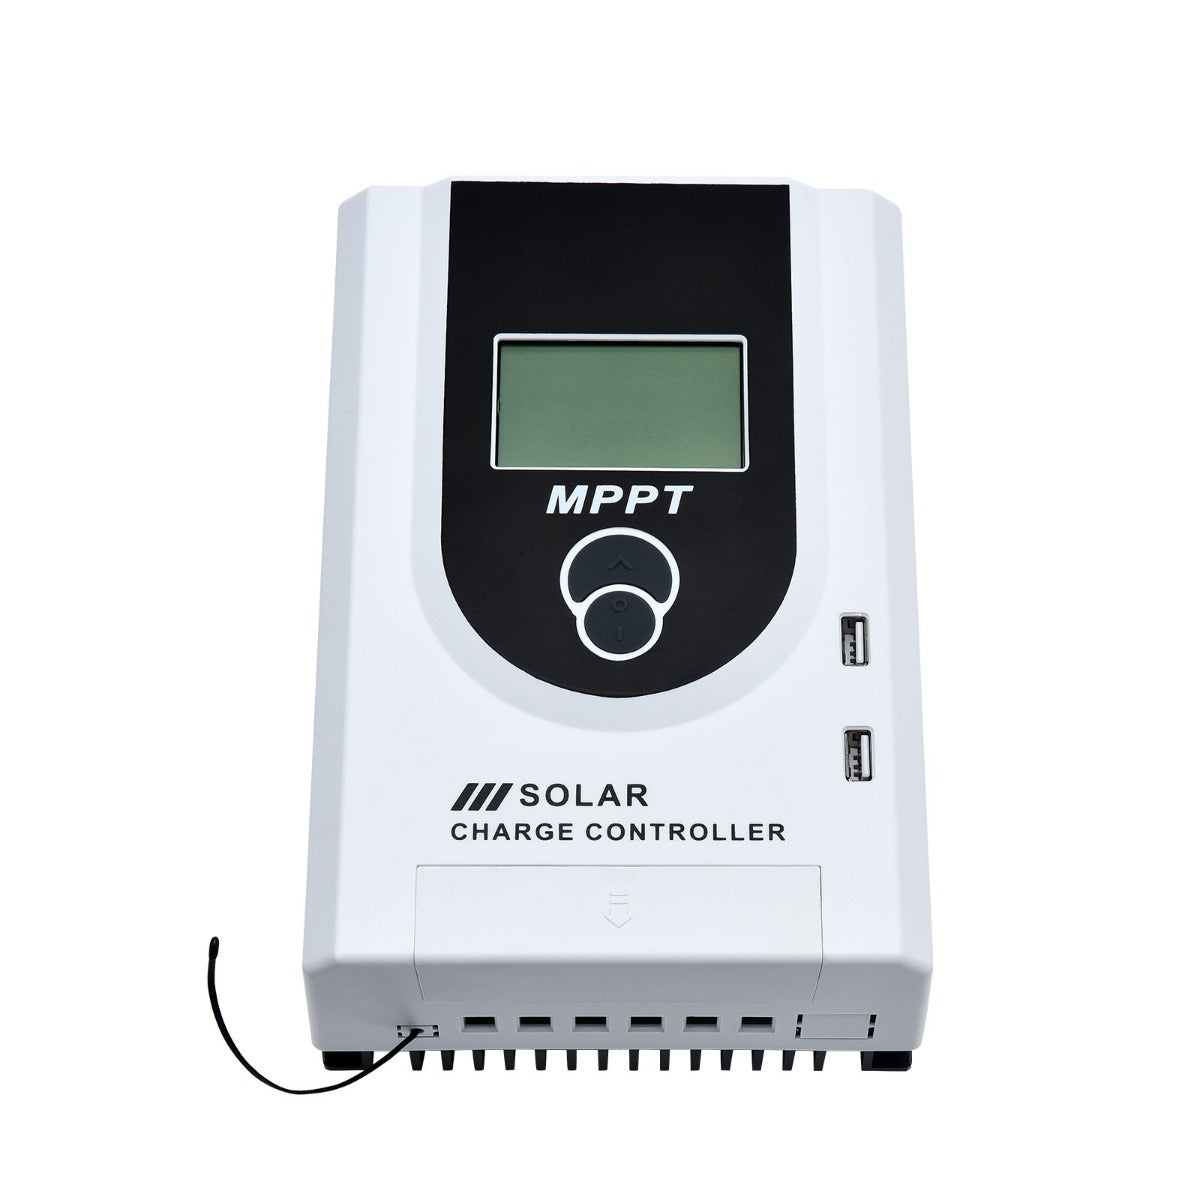 BUNDLE DEAL - LiFePO4 Battery Charging Kit 2x 100W Solar Panel 20A MPPT Controller with Cable